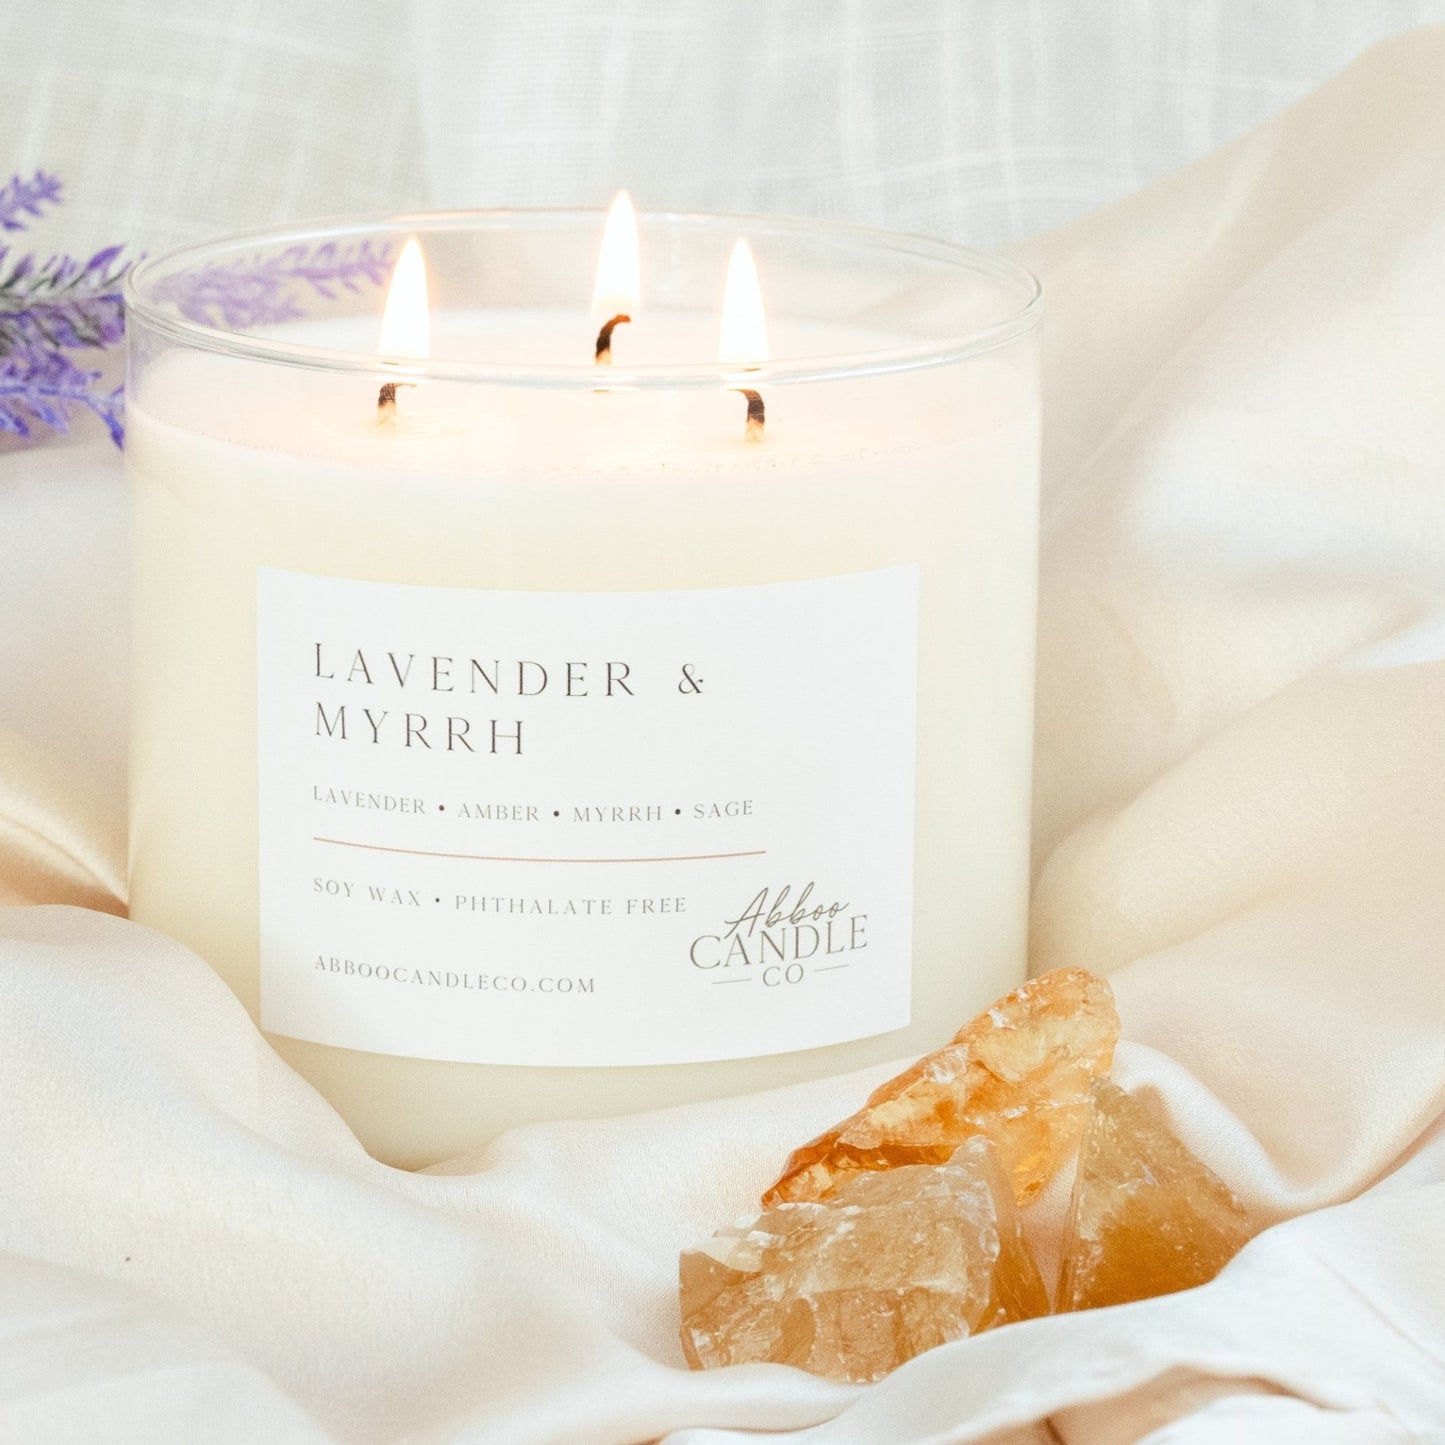 Lavender and Myrrh 3-Wick Soy Candle - Abboo Candle Co